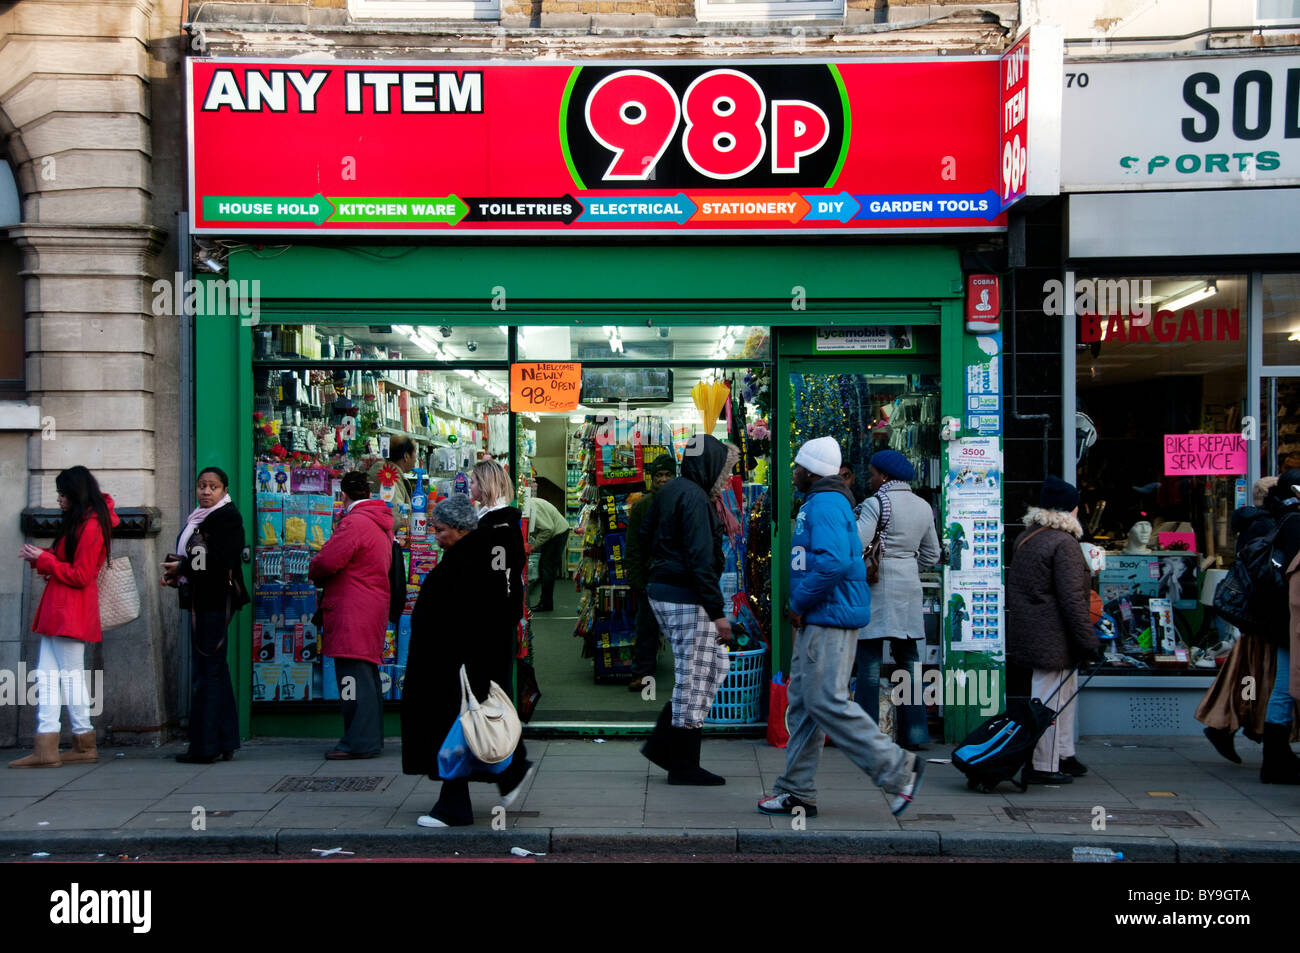 Hackney London. 98p discount shop with shoppers on the pavement Stock Photo